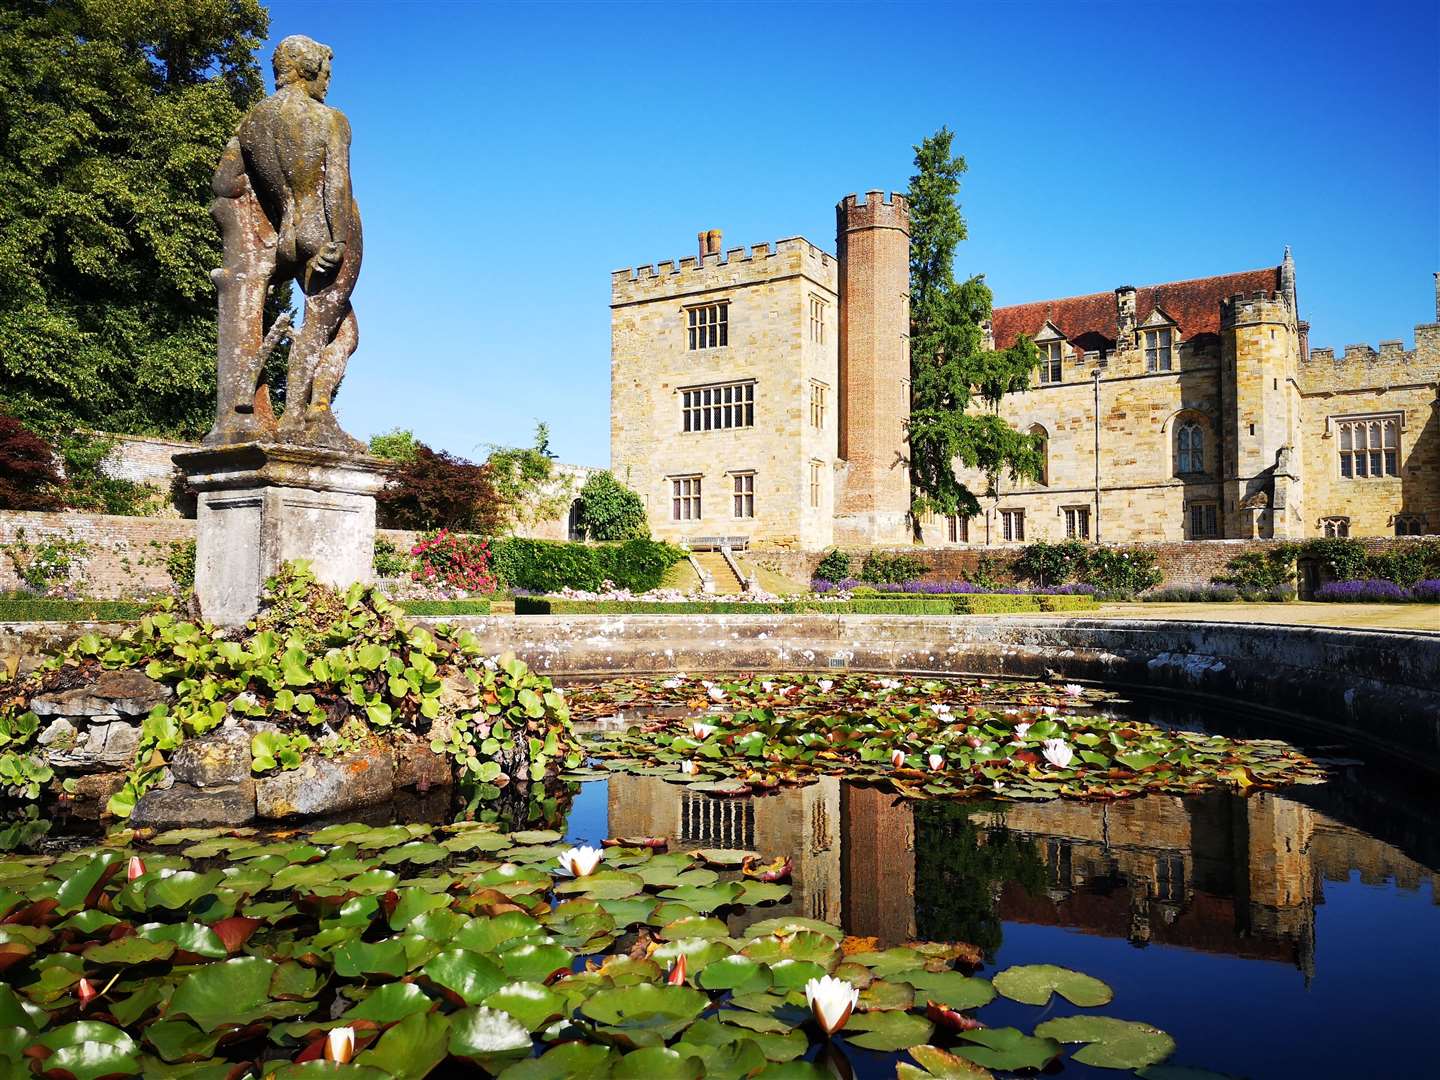 The exhibition at Penshurst Place displays the personal collection of 1st Viscount De L’Isle and includes memorabilia from the Queen's 1952 coronation. Picture: Penshurst Place